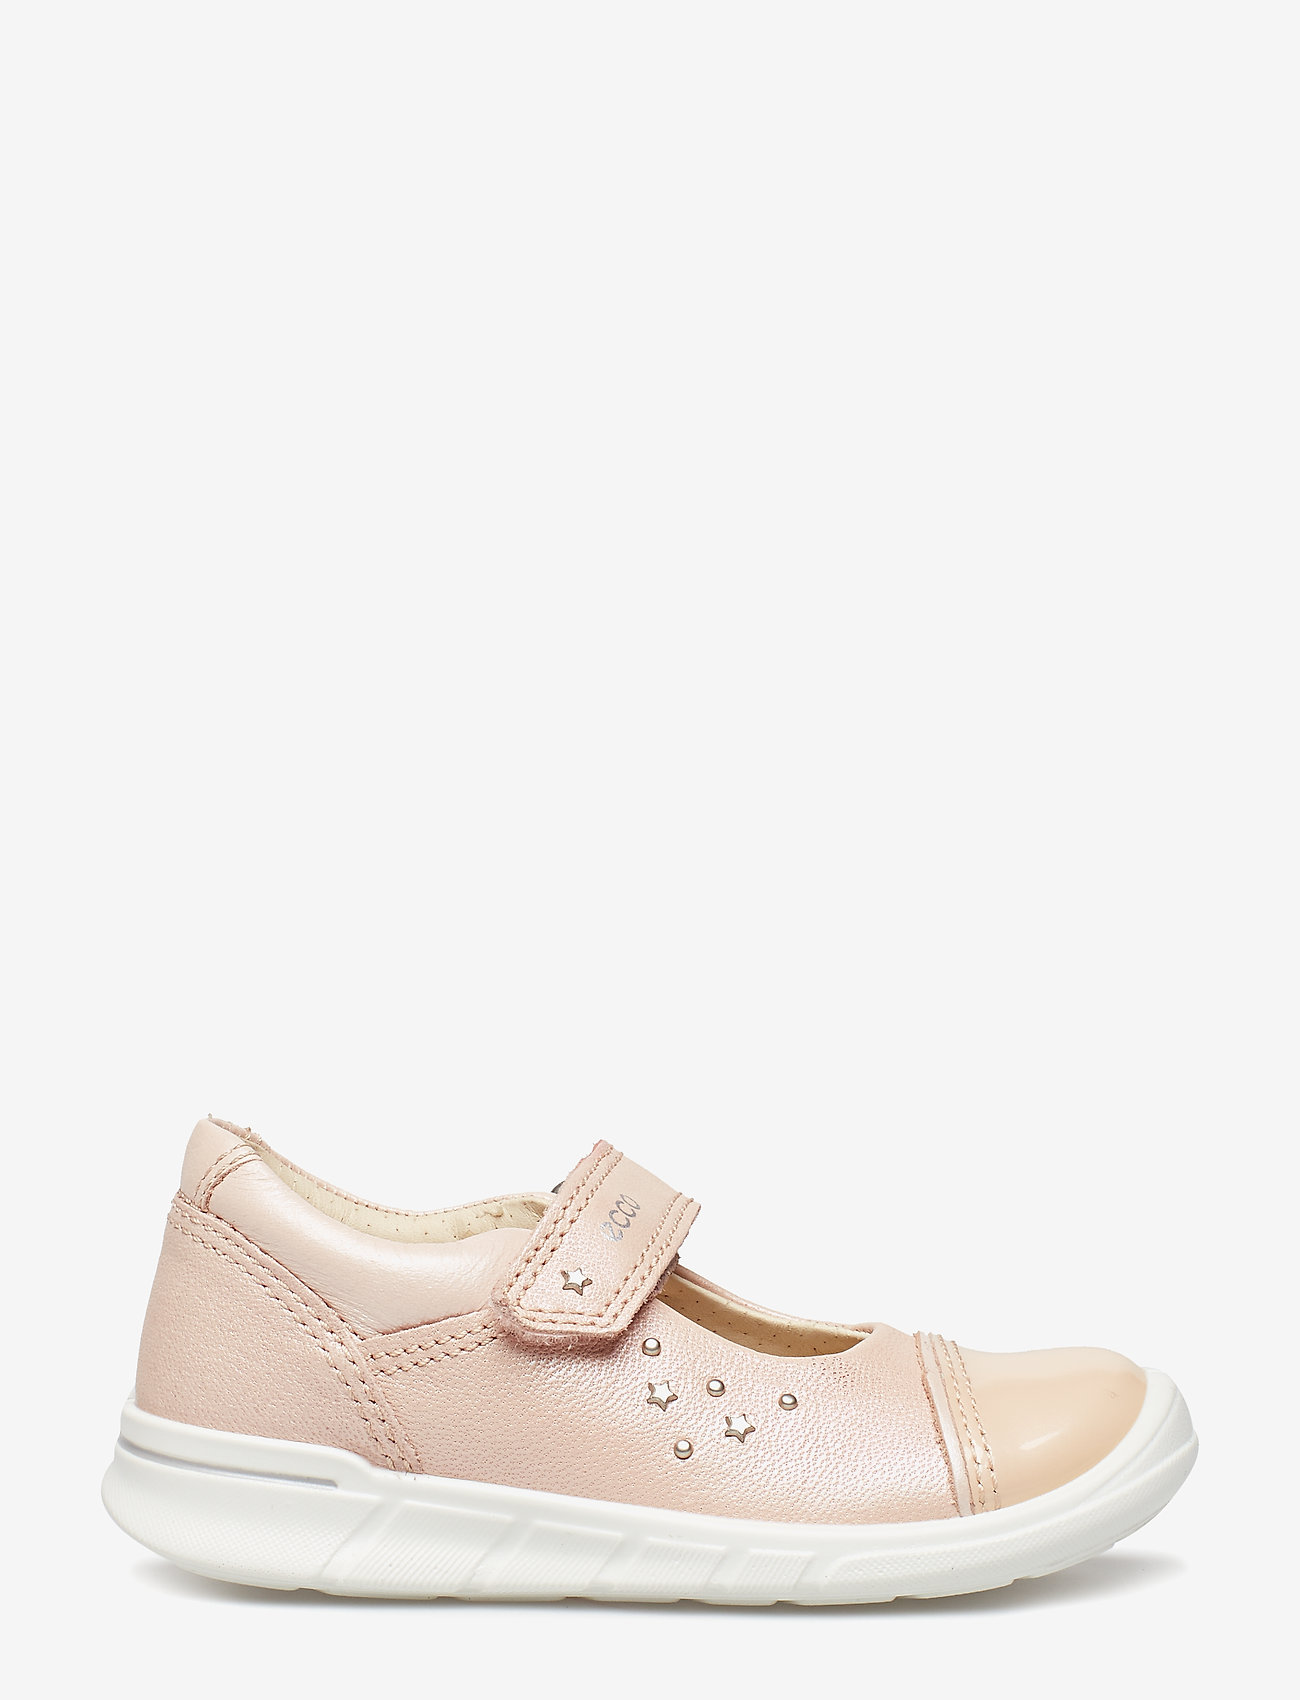 ECCO - FIRST - strap sandals - rose dust/rose dust - 1